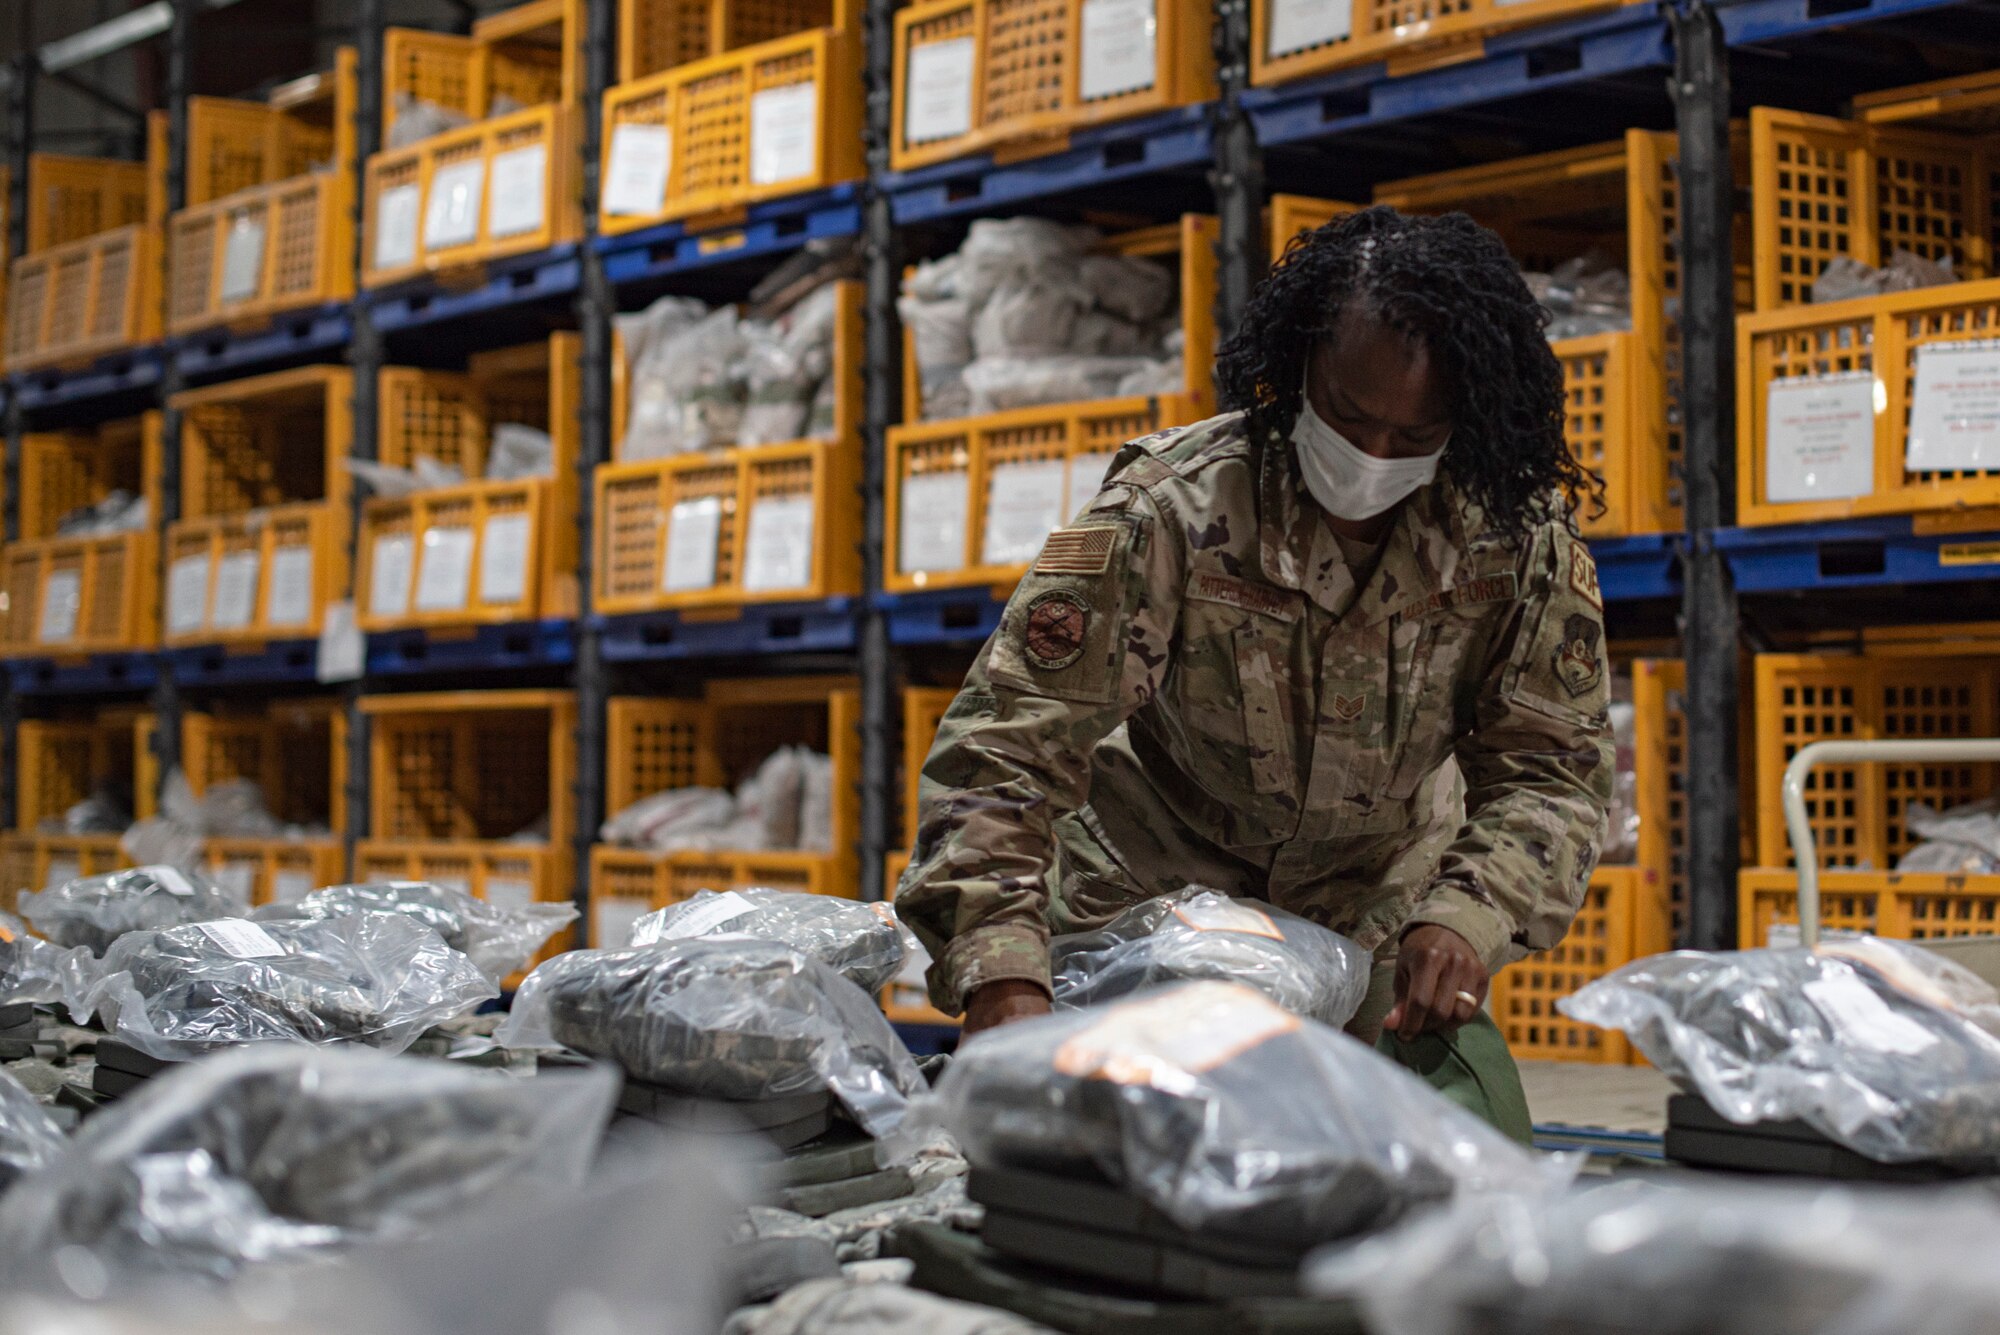 386th LRS ETDC Airmen provide material support